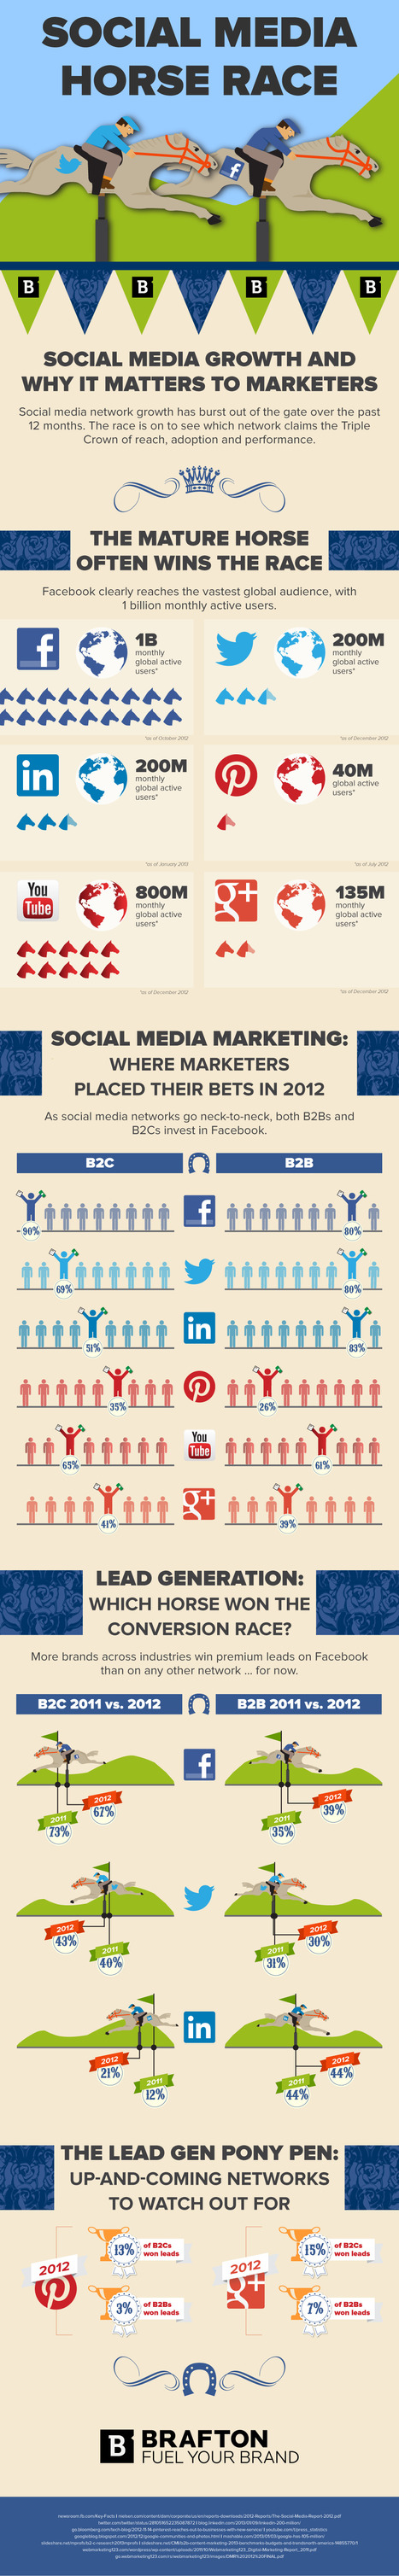 The Rising Influence of Social Media INFOGRAPHIC Social Media Today | Business Improvement and Social media | Scoop.it